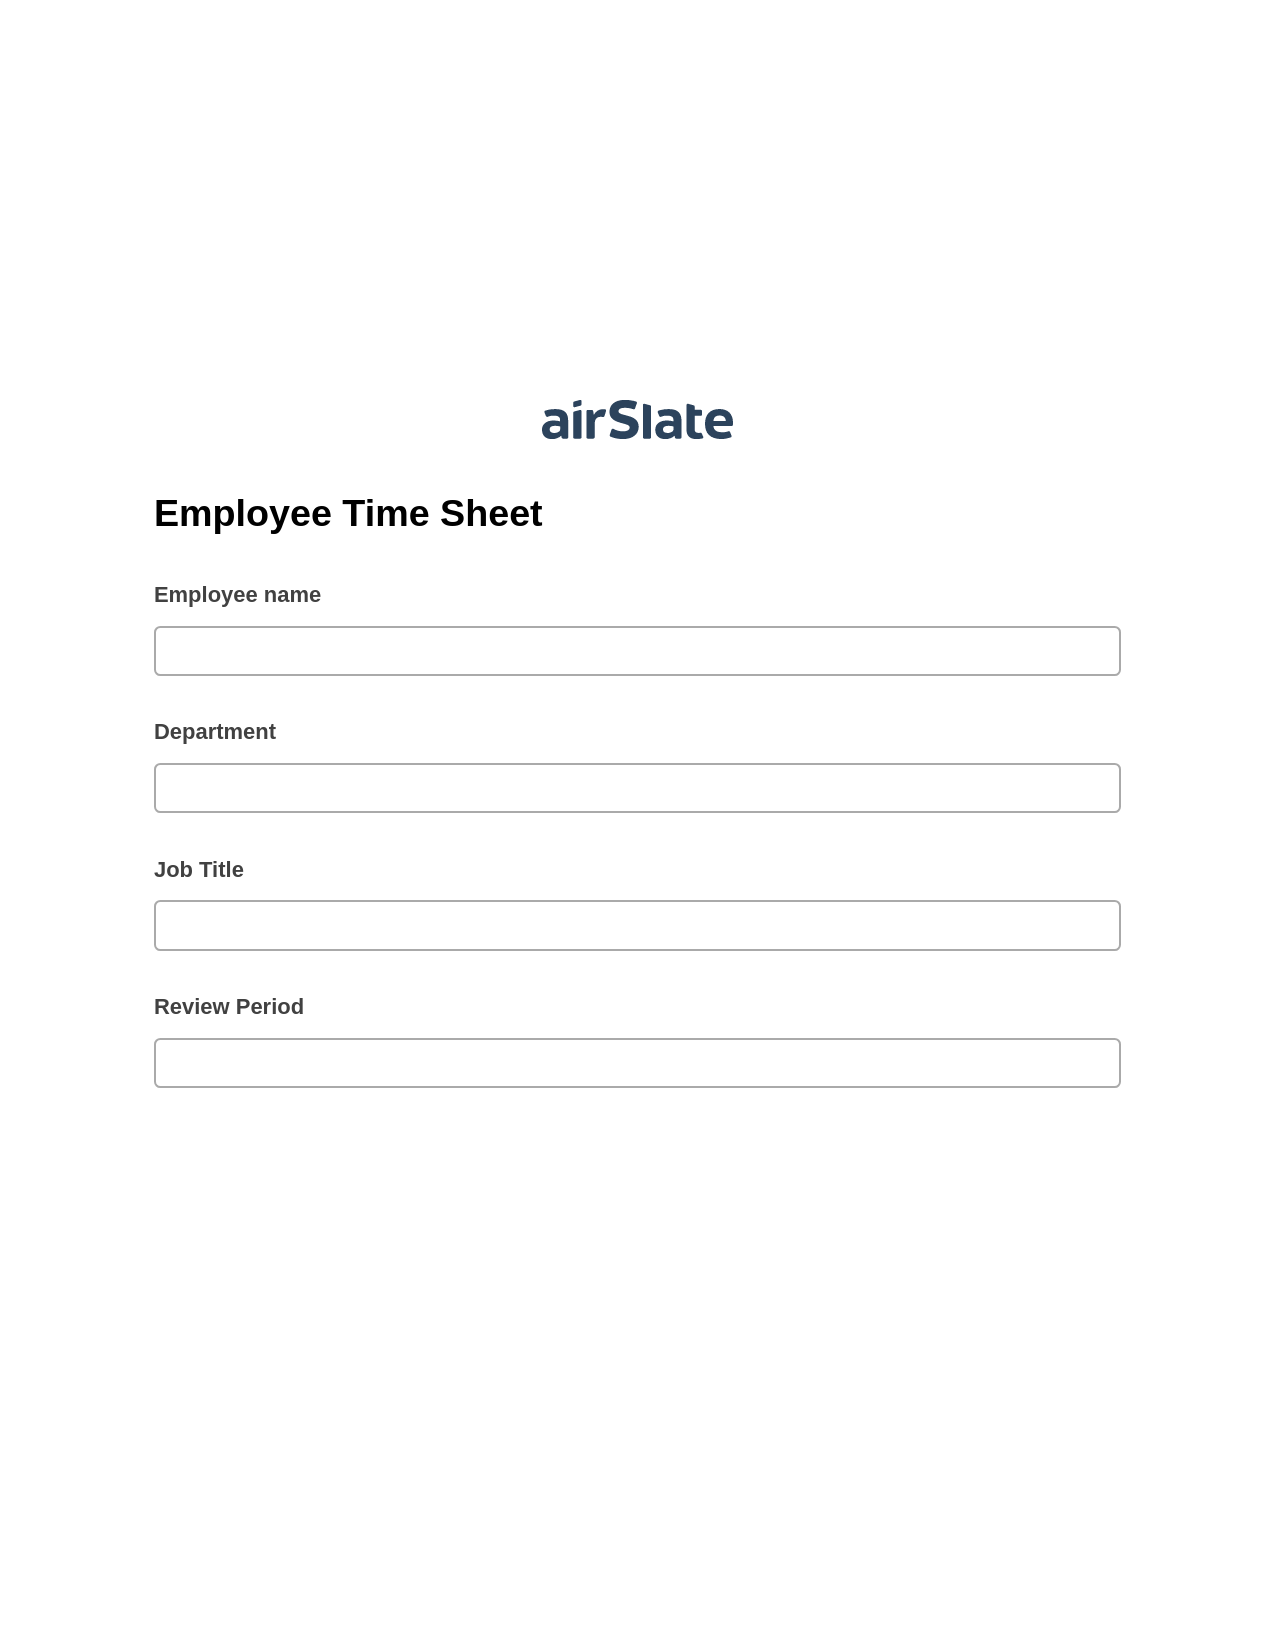 Multirole Employee Time Sheet Pre-fill from Litmos bot, Create slate from another Flow Bot, Export to NetSuite Bot